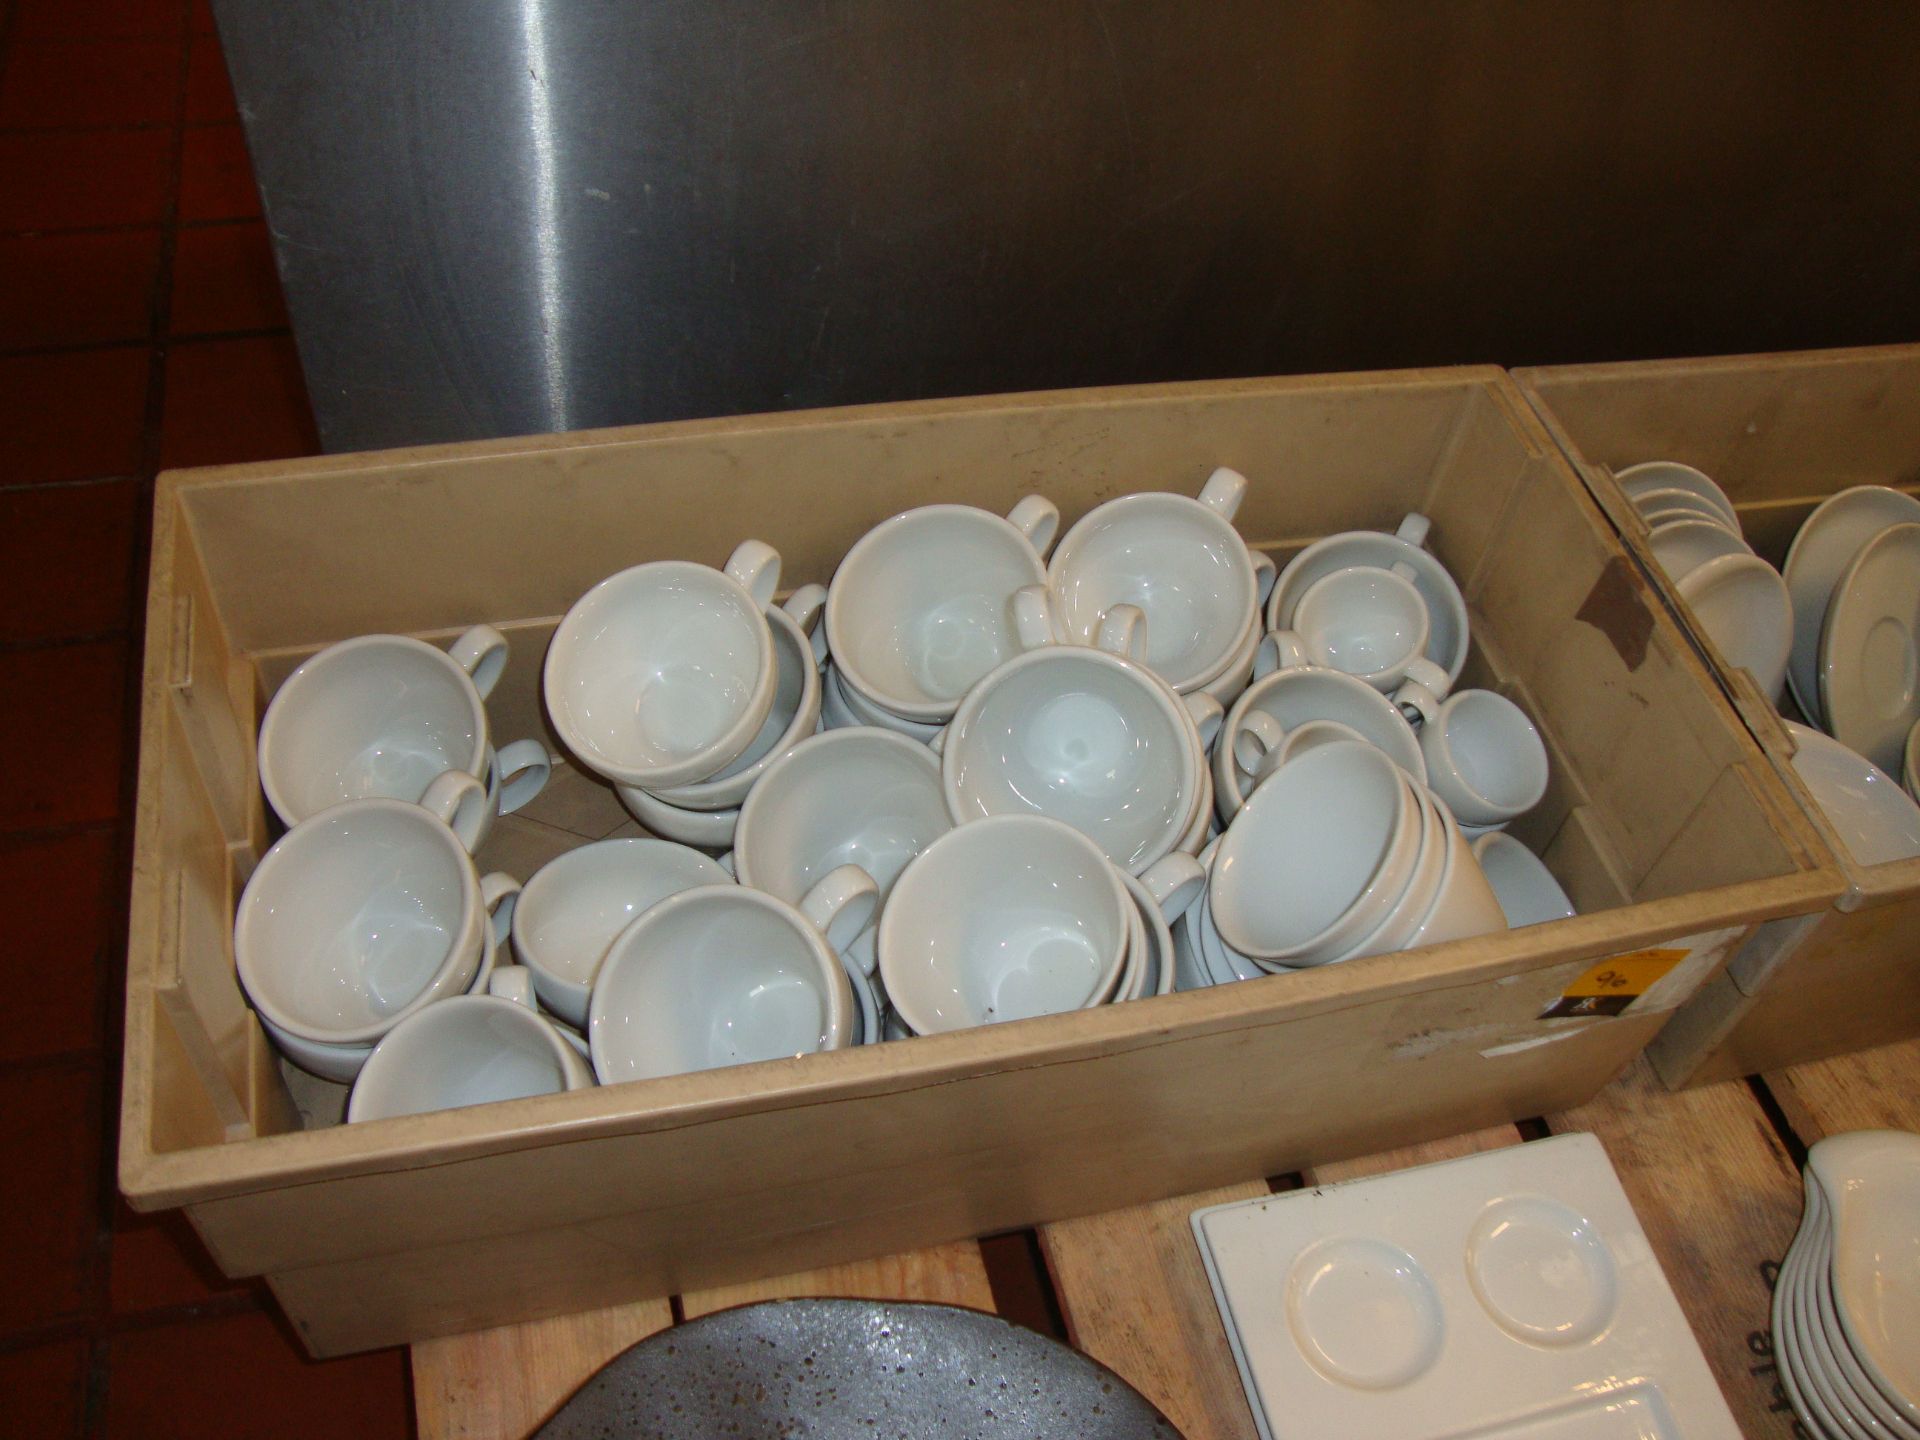 The contents of a pallet of assorted crockery, cups & saucers - beige crates excluded - Image 5 of 7